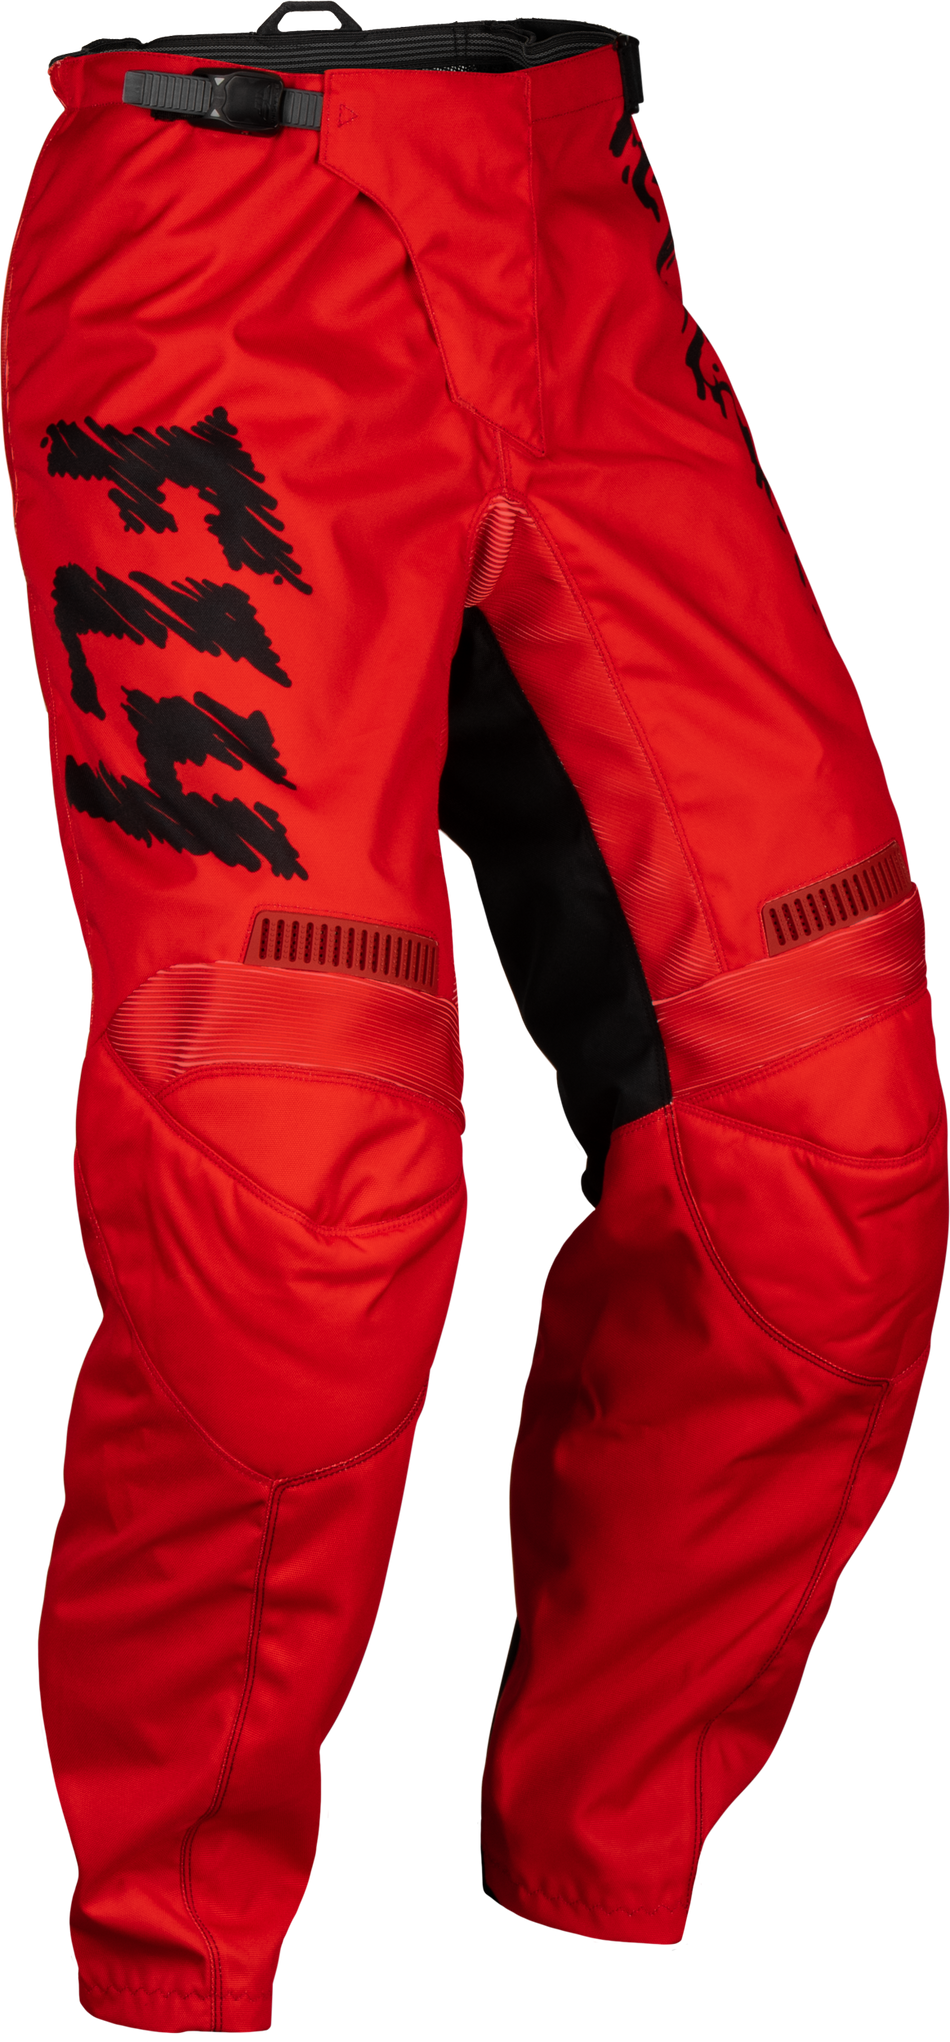 FLY RACING Youth F-16 Pants Red/Black/Grey Sz 18 377-23218